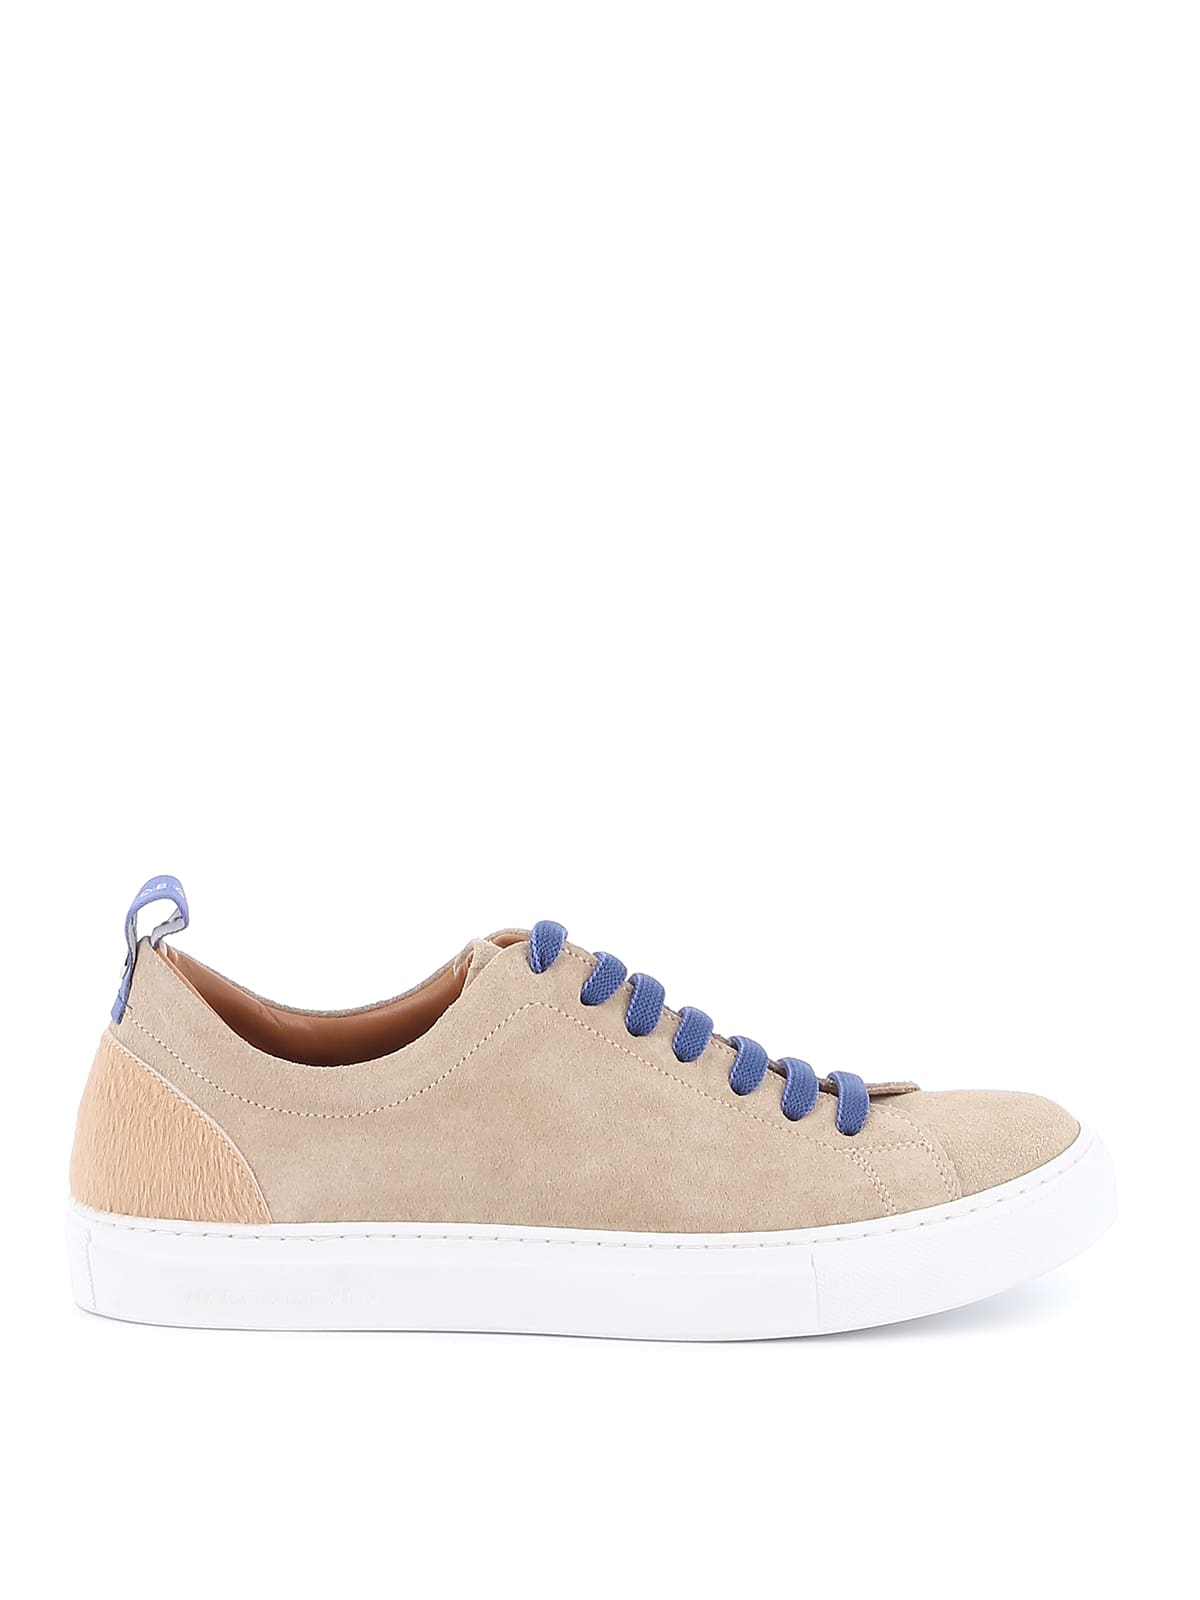 JACOB COHEN SNAKERS SUEDE PONY,JACK.91002 302 TAOS TAUPE